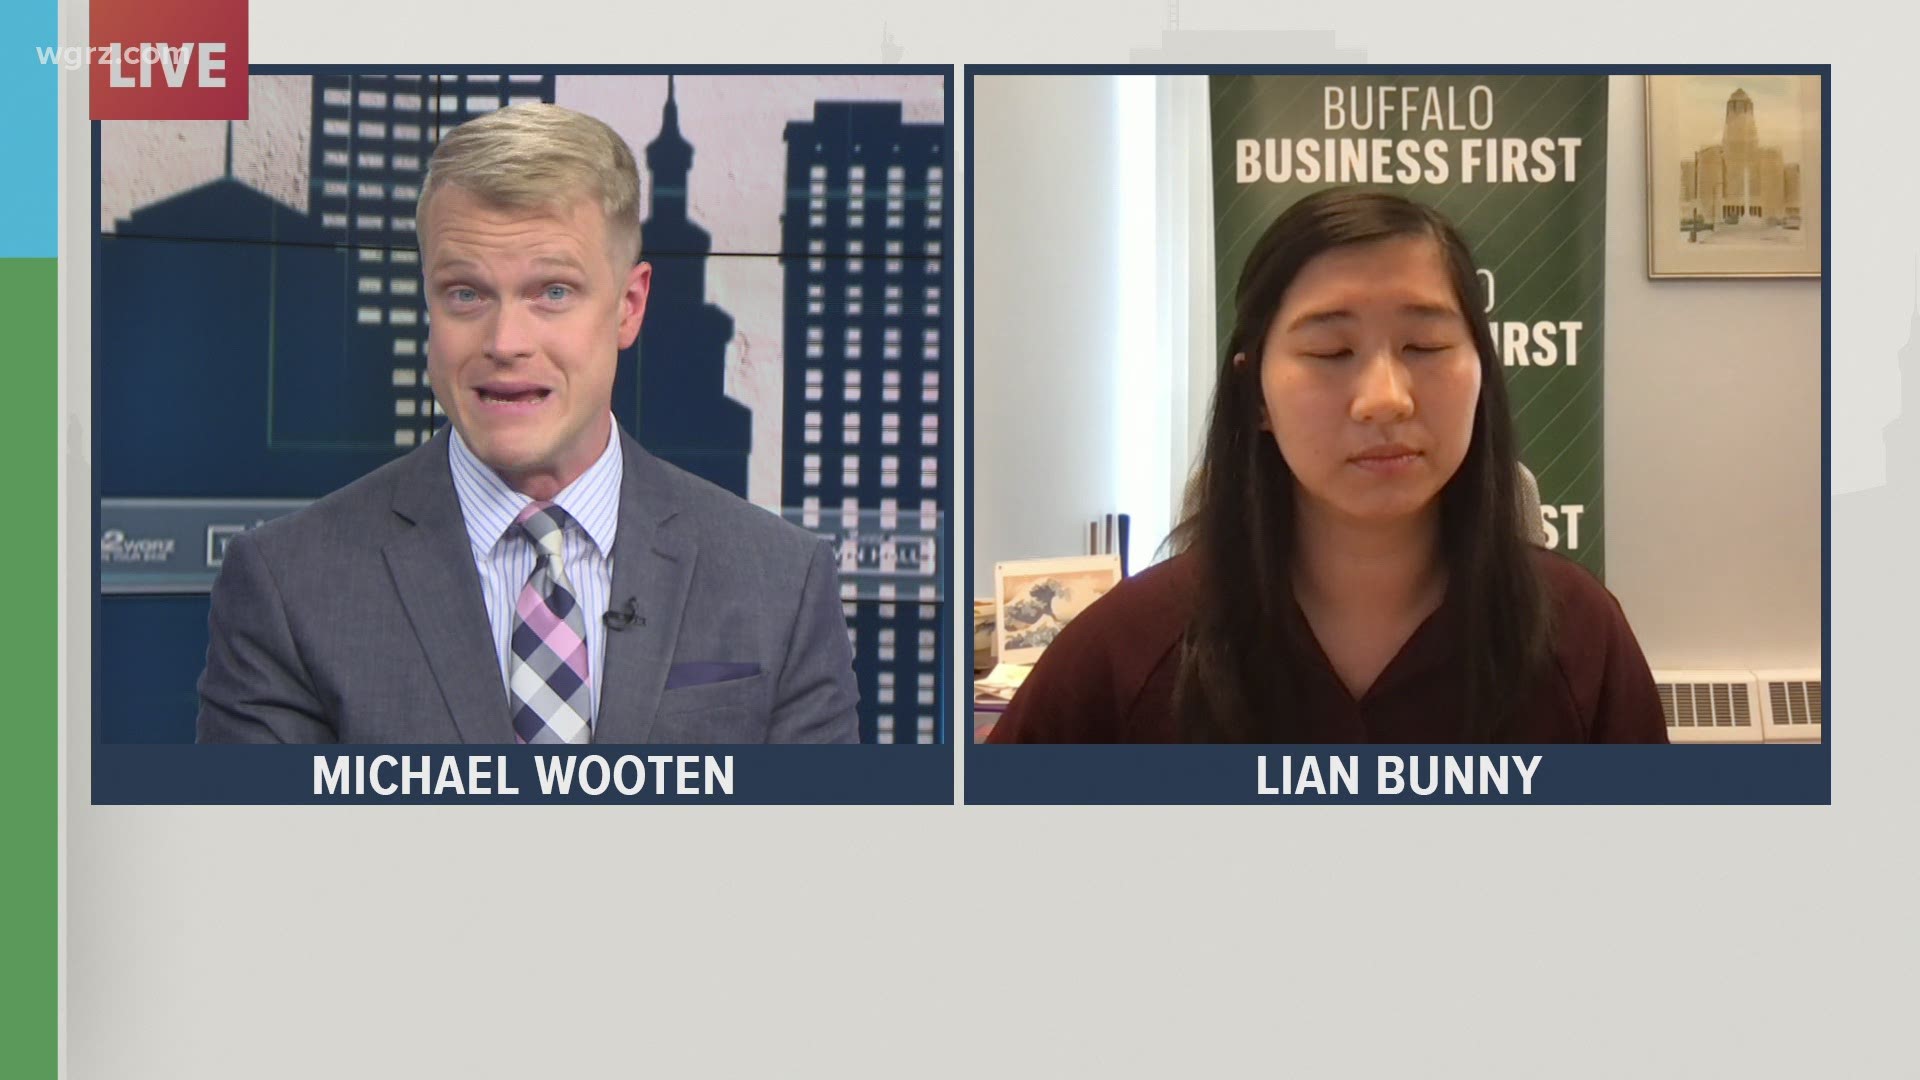 Lian Bunny, education reporter for Buffalo Business First, joins our Town Hall to discuss the School Guide.